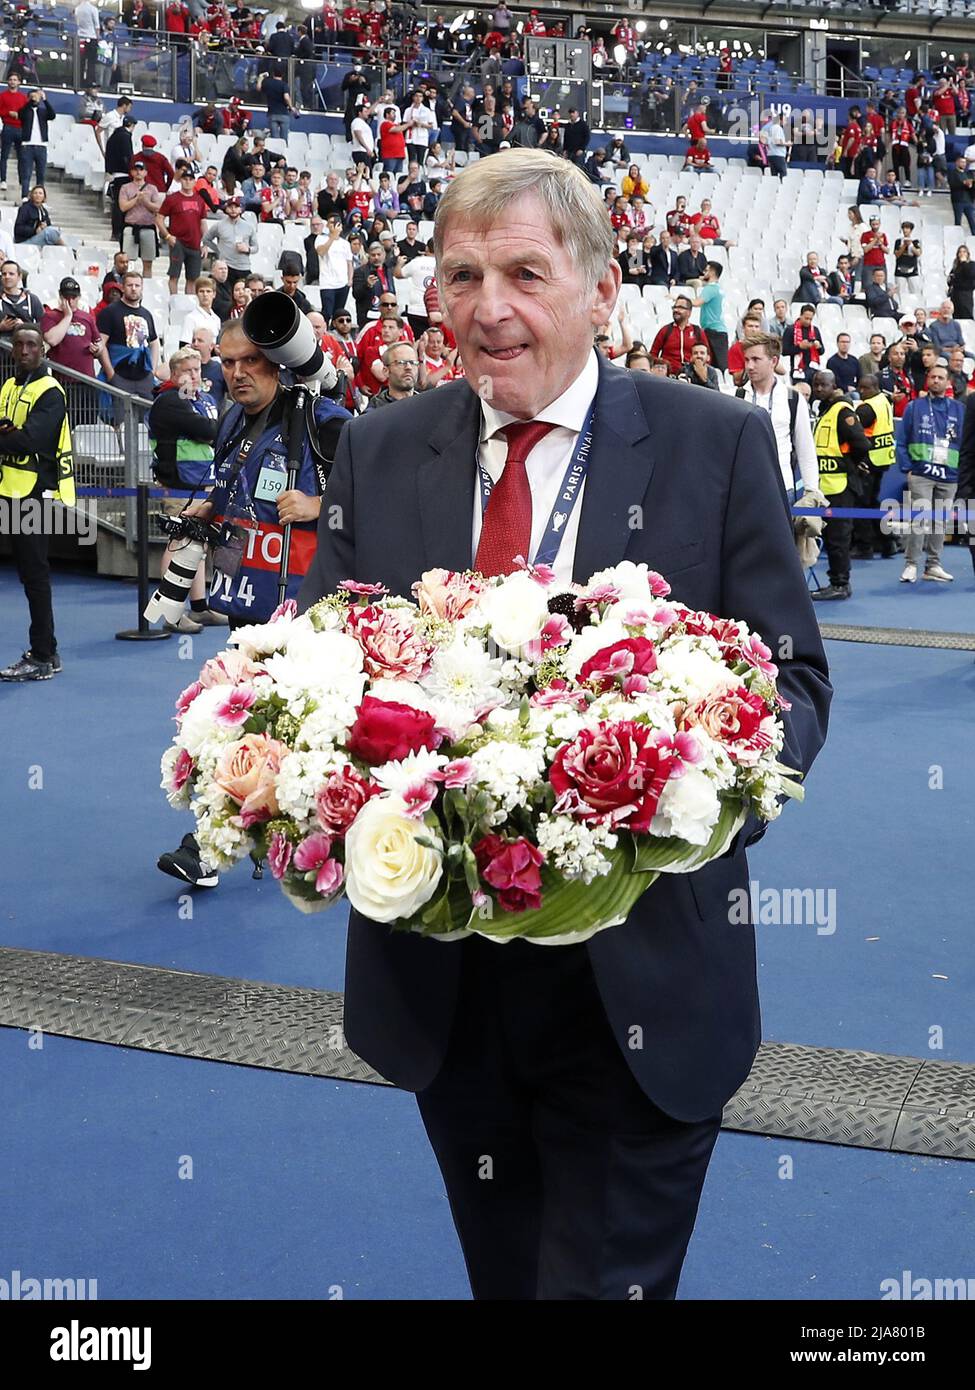 Paris, France. 28th May, 2022. PARIS - Kenny Dalglish lay a commerative  wreath for the Heysel disaster during the UEFA Champions League final match  between Liverpool FC and Real Madrid at Stade